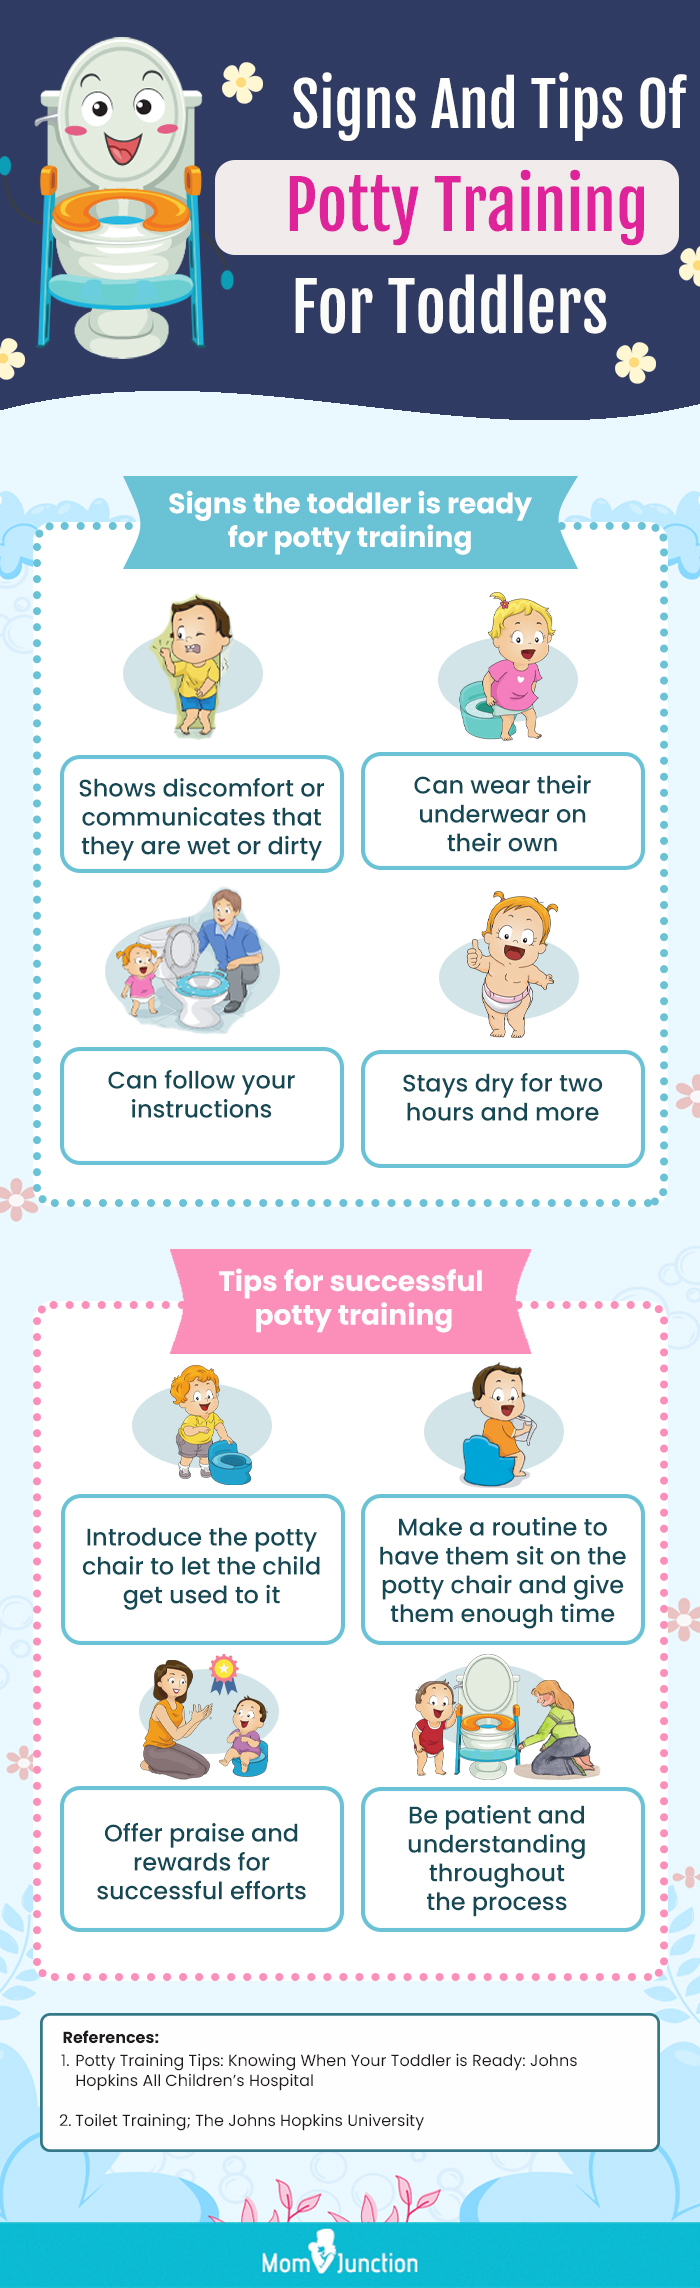 Signs And Tips Of Potty Training For Toddlers (infographic)